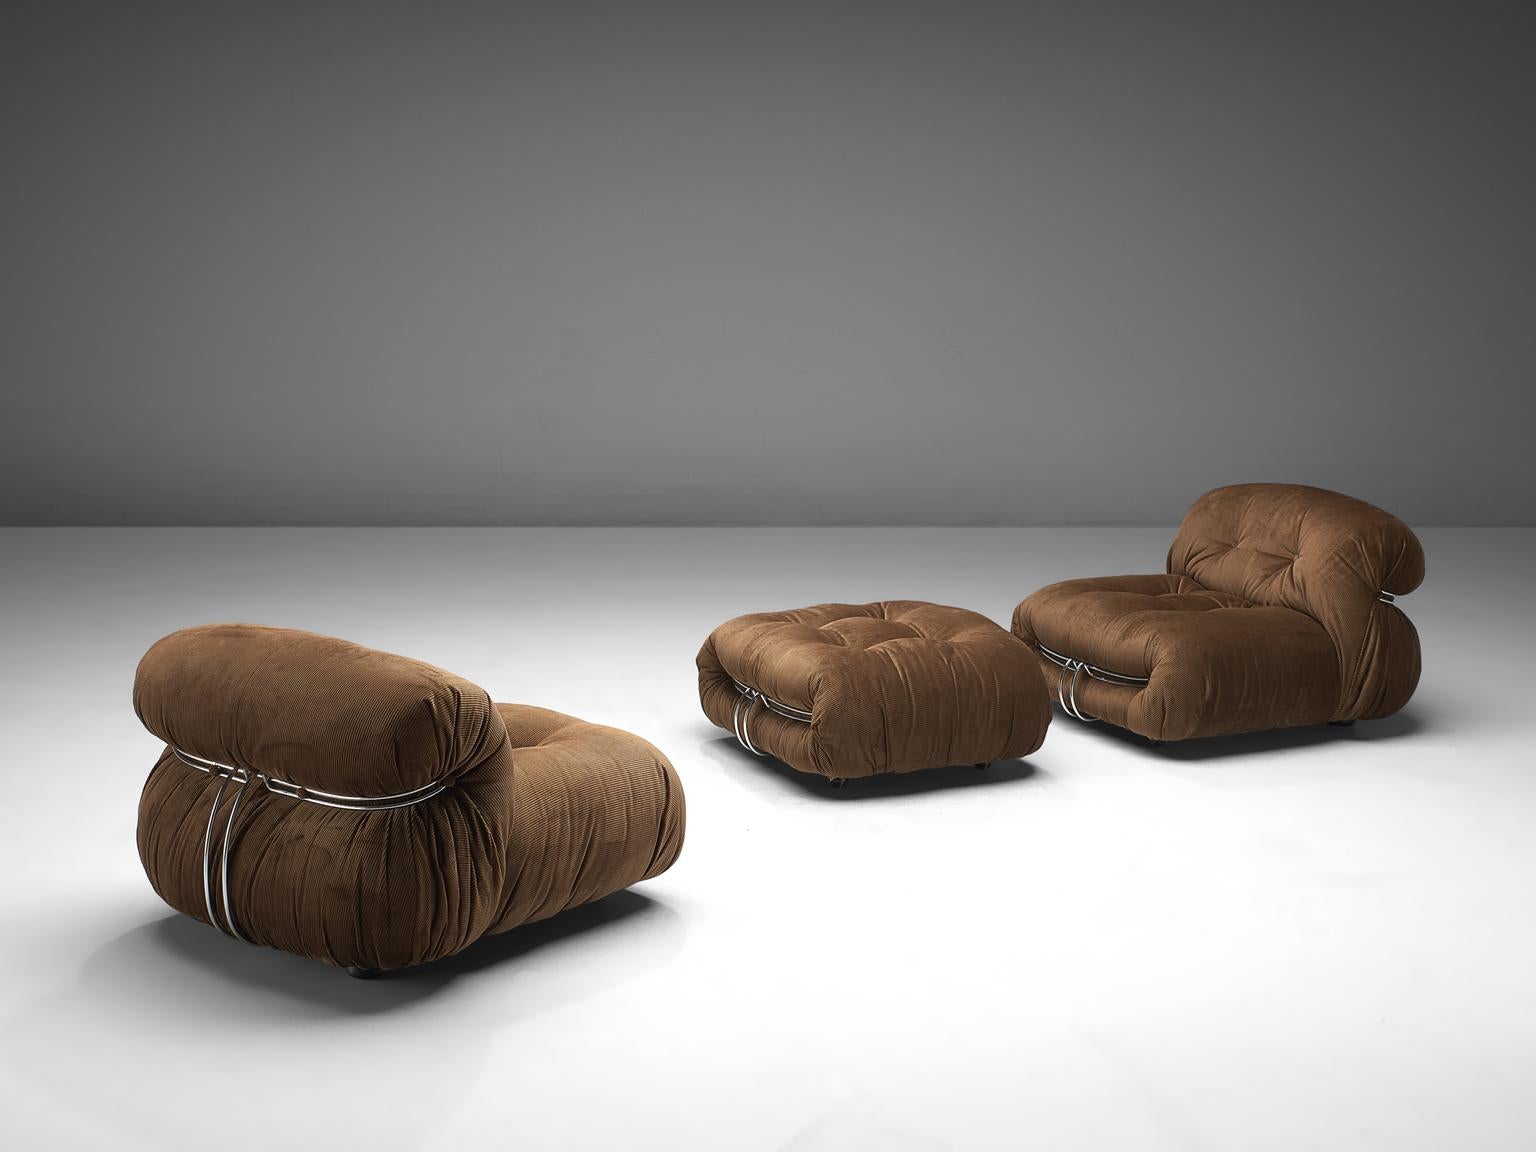 Mid-Century Modern For Jessica: Scarpa Set of 'Soriana' Lounge Chairs with Ottomans 2/2